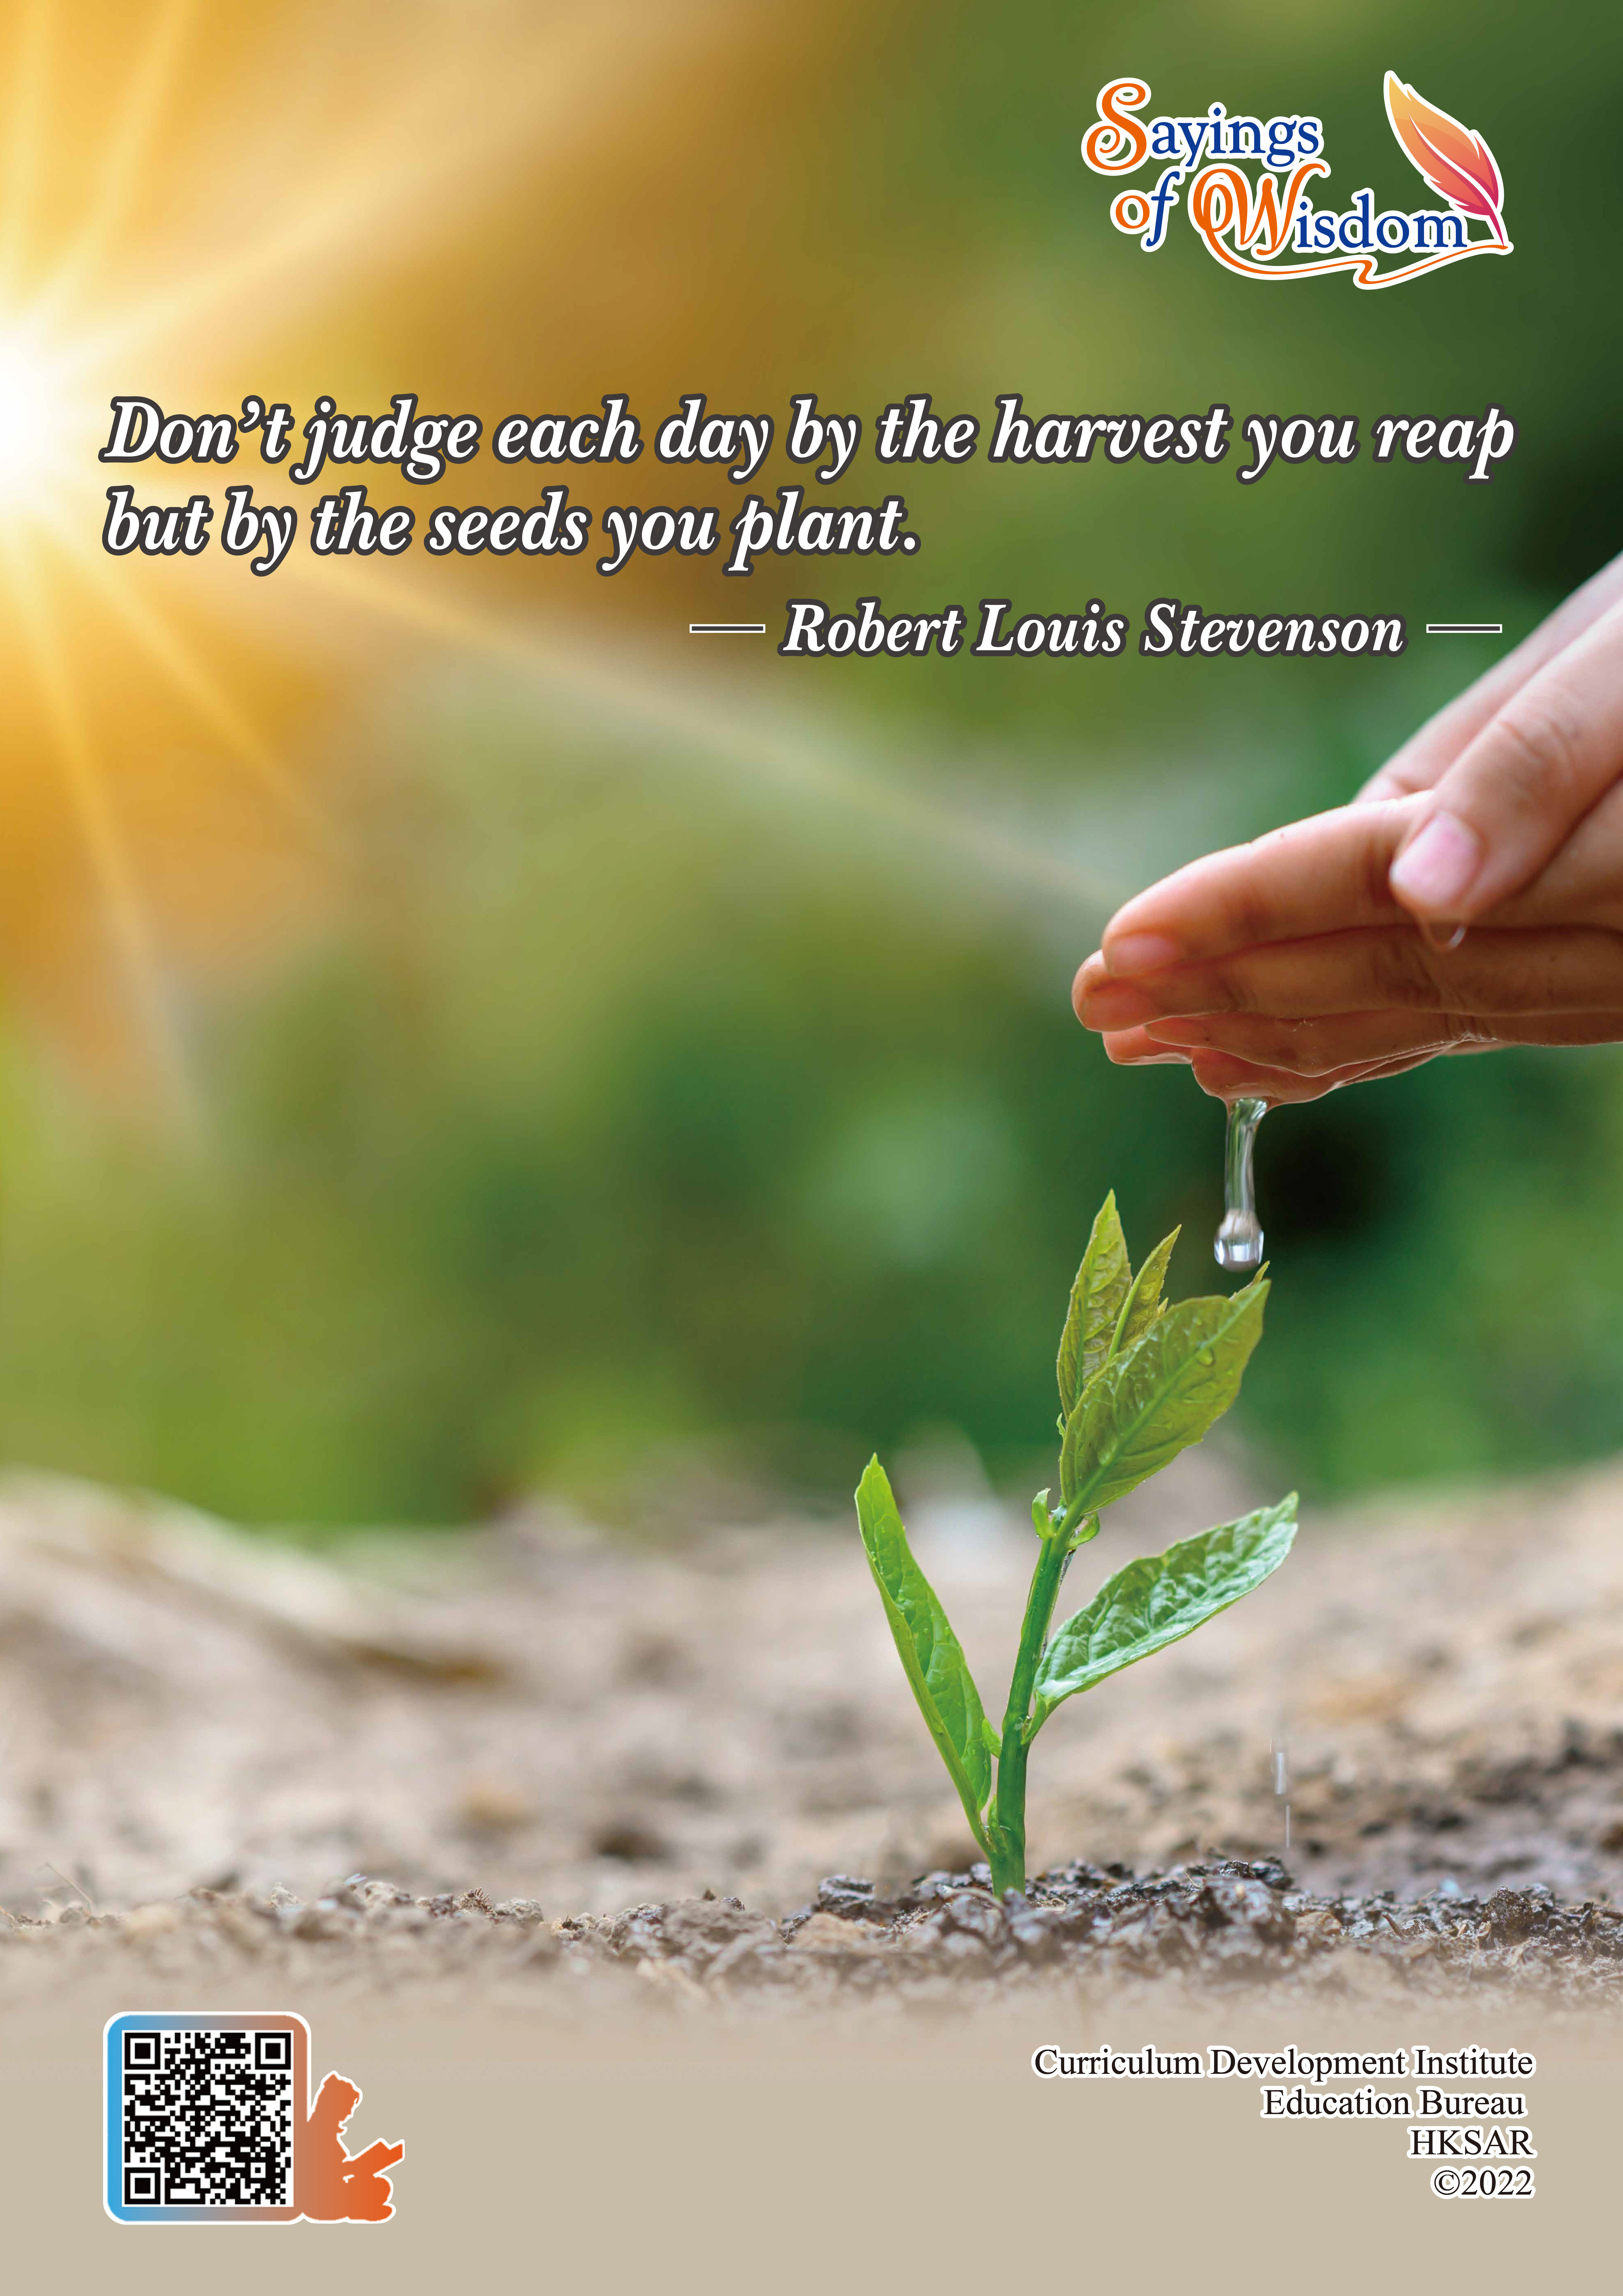 Don't judge each day by the harvest you reap but by the seeds you plant.